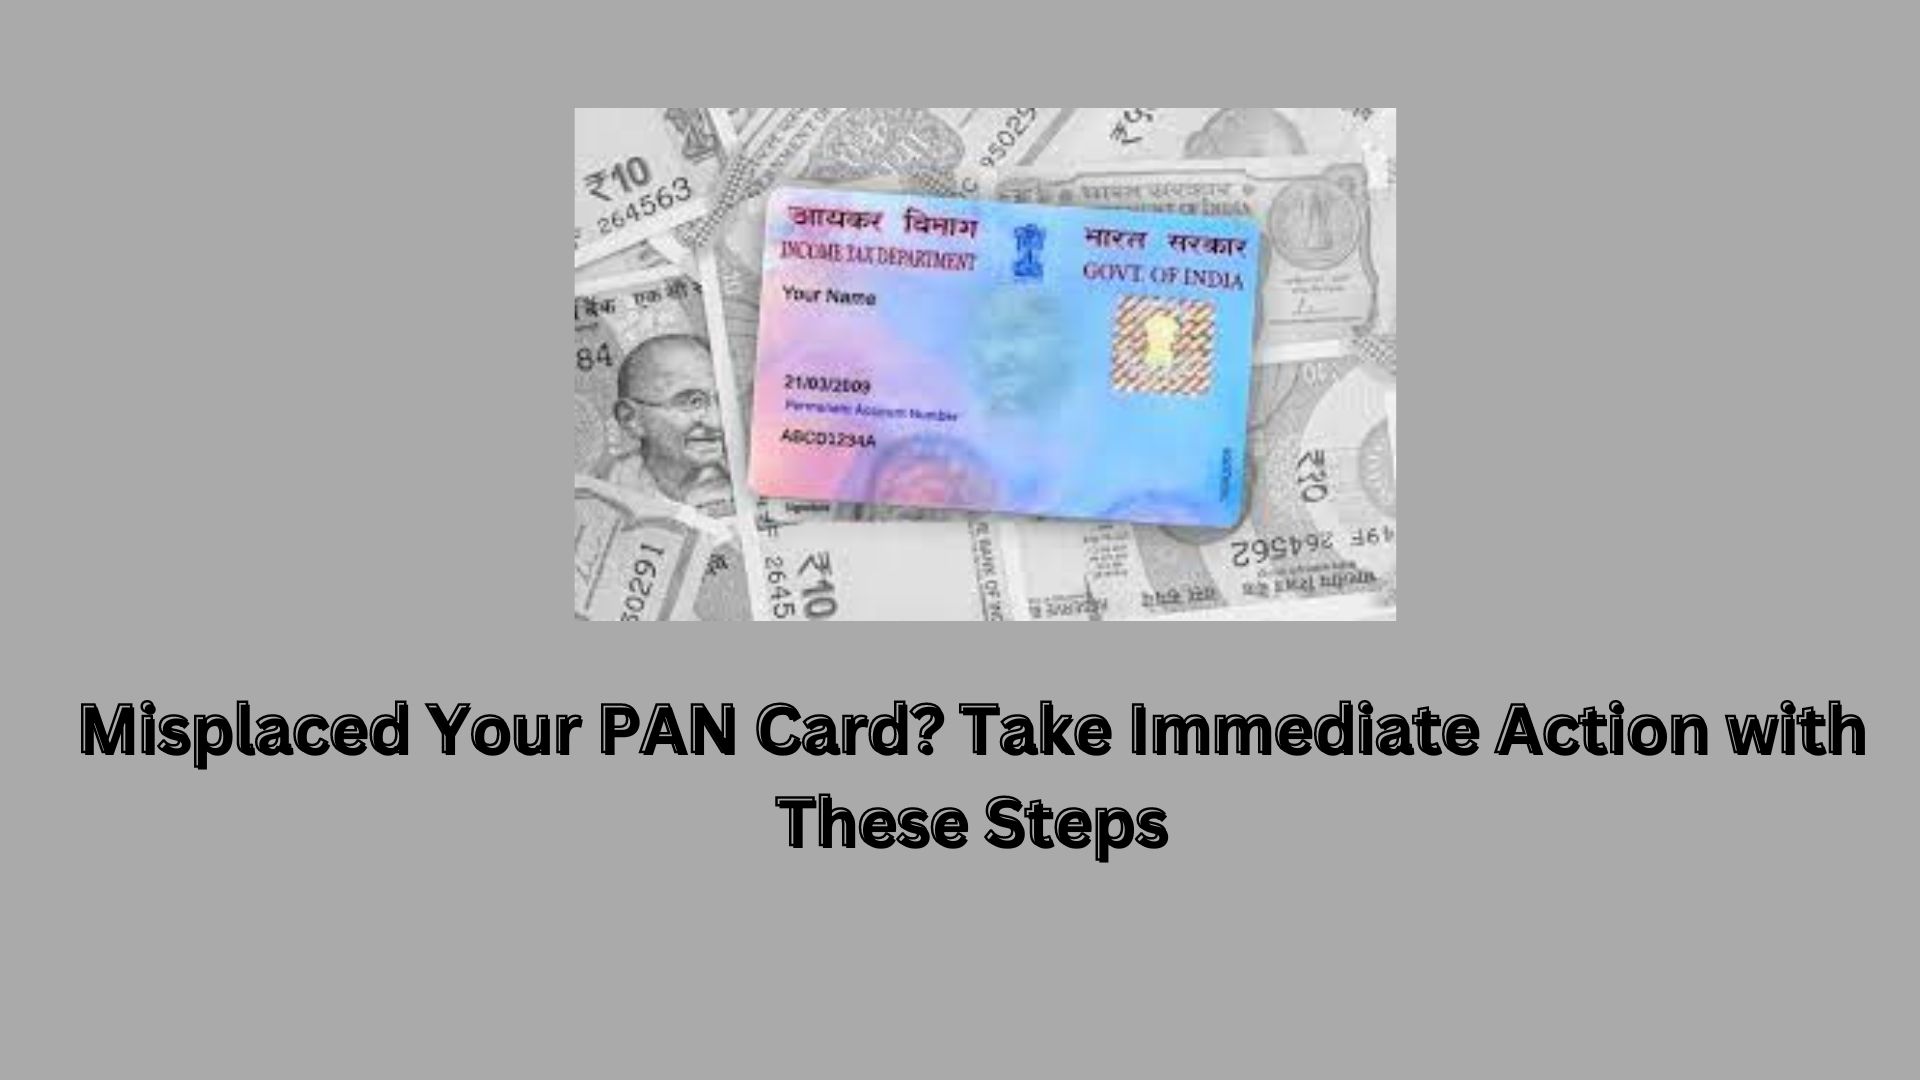 Misplaced Your PAN Card? Take Immediate Action with These Steps